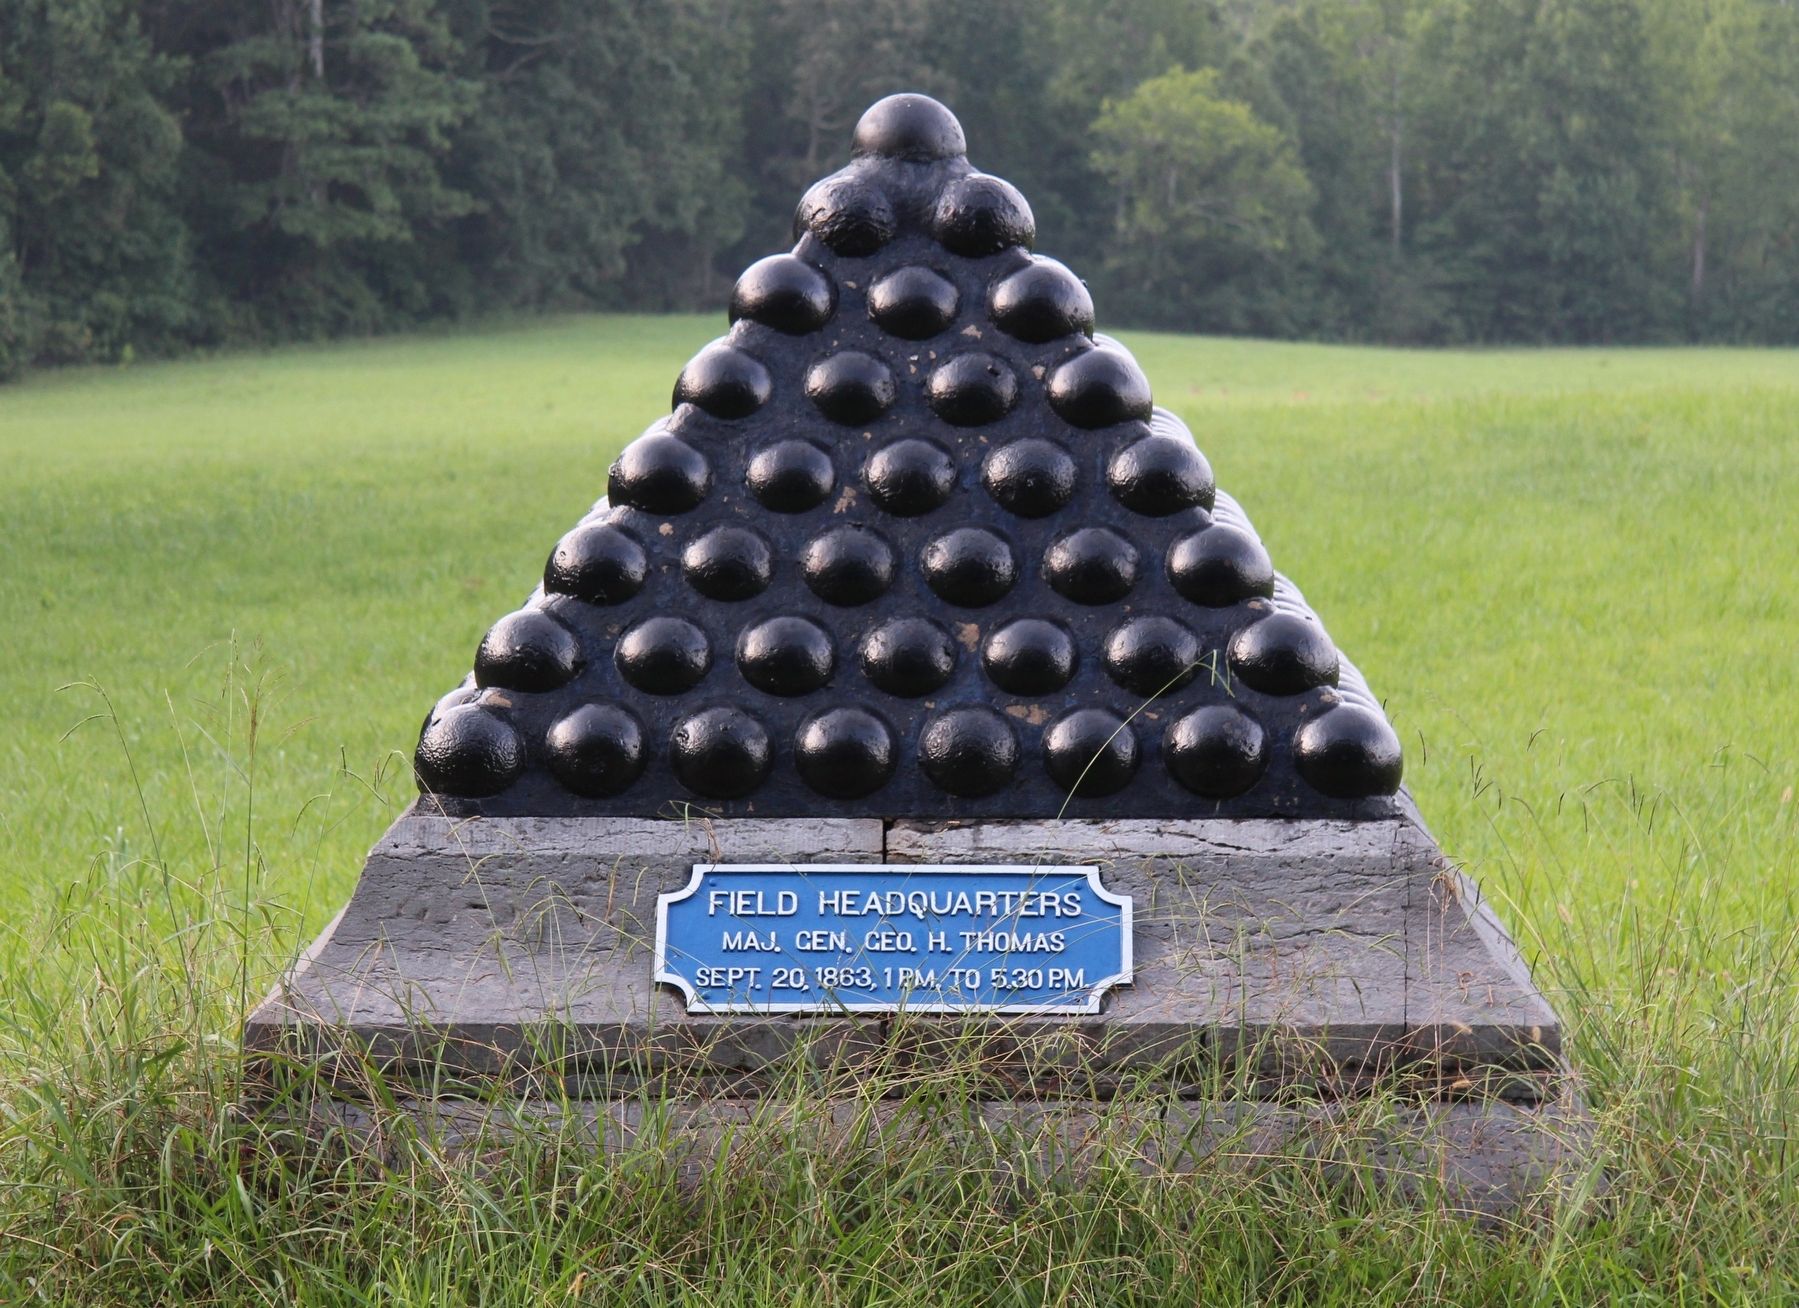 Thomas' Headquarters Shell Monument Marker image. Click for full size.